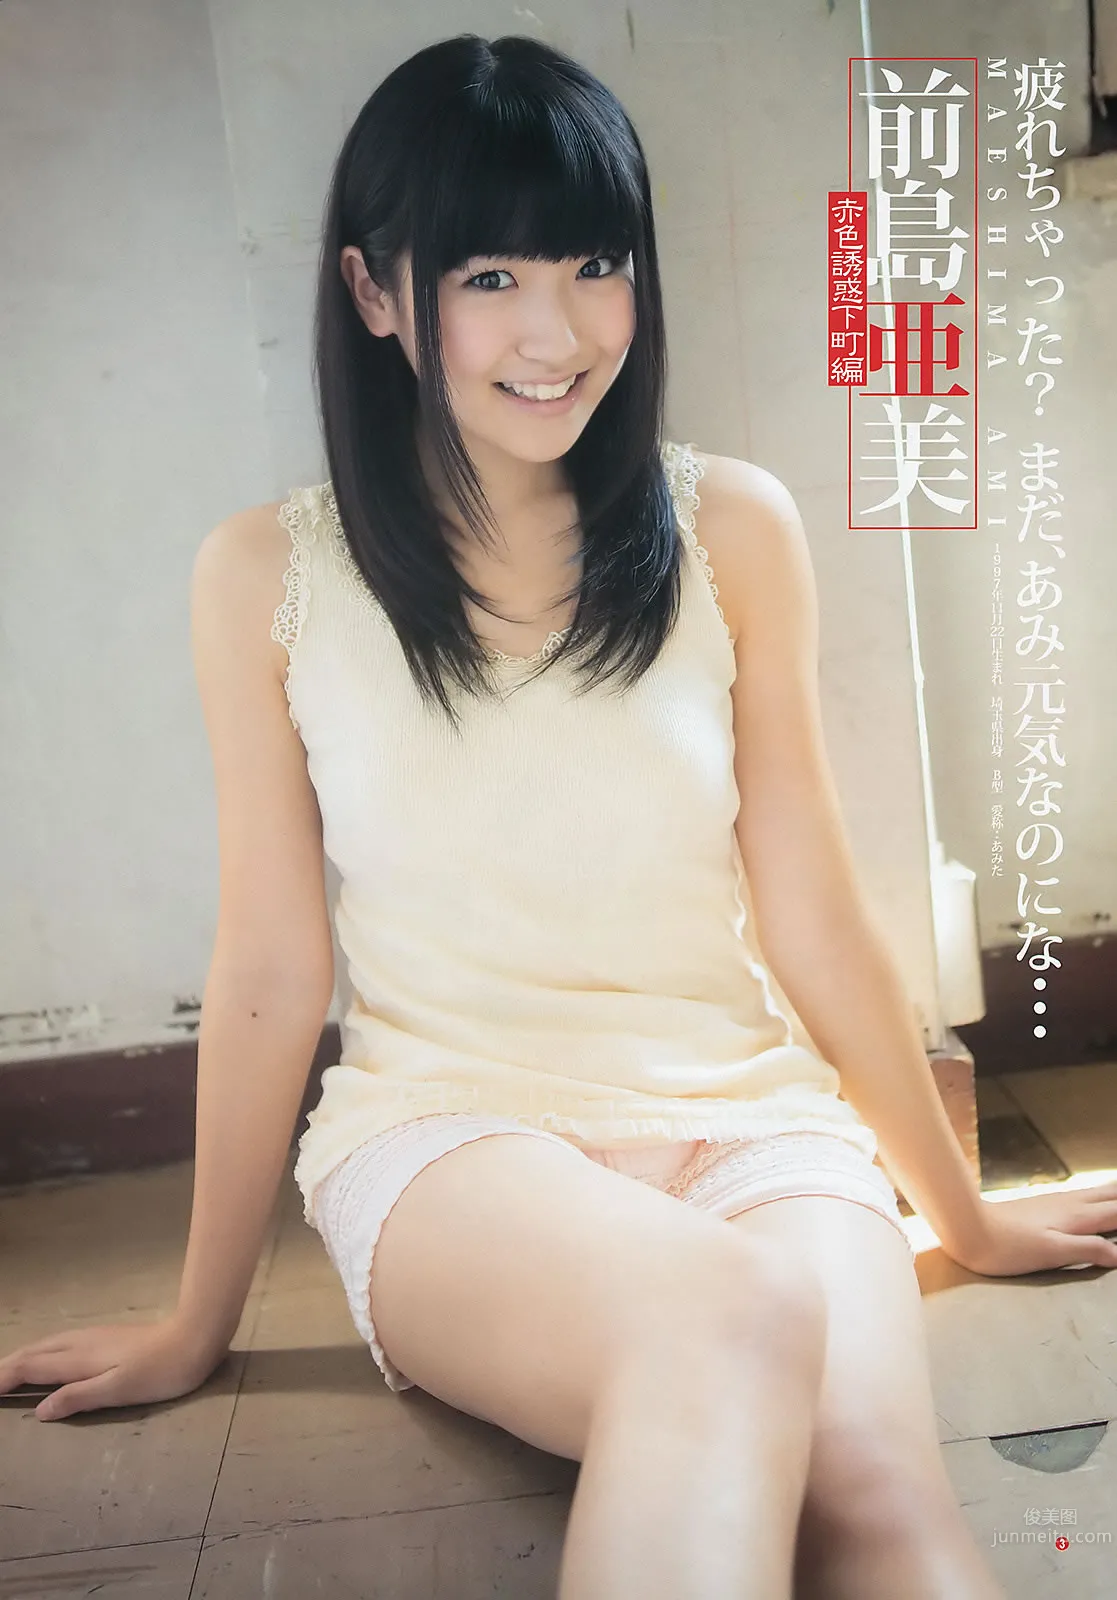 [Weekly Young Jump] 2012 No.45 46 SUPER☆GiRLS 佐々木もよこ 山本彩 松井咲子_9